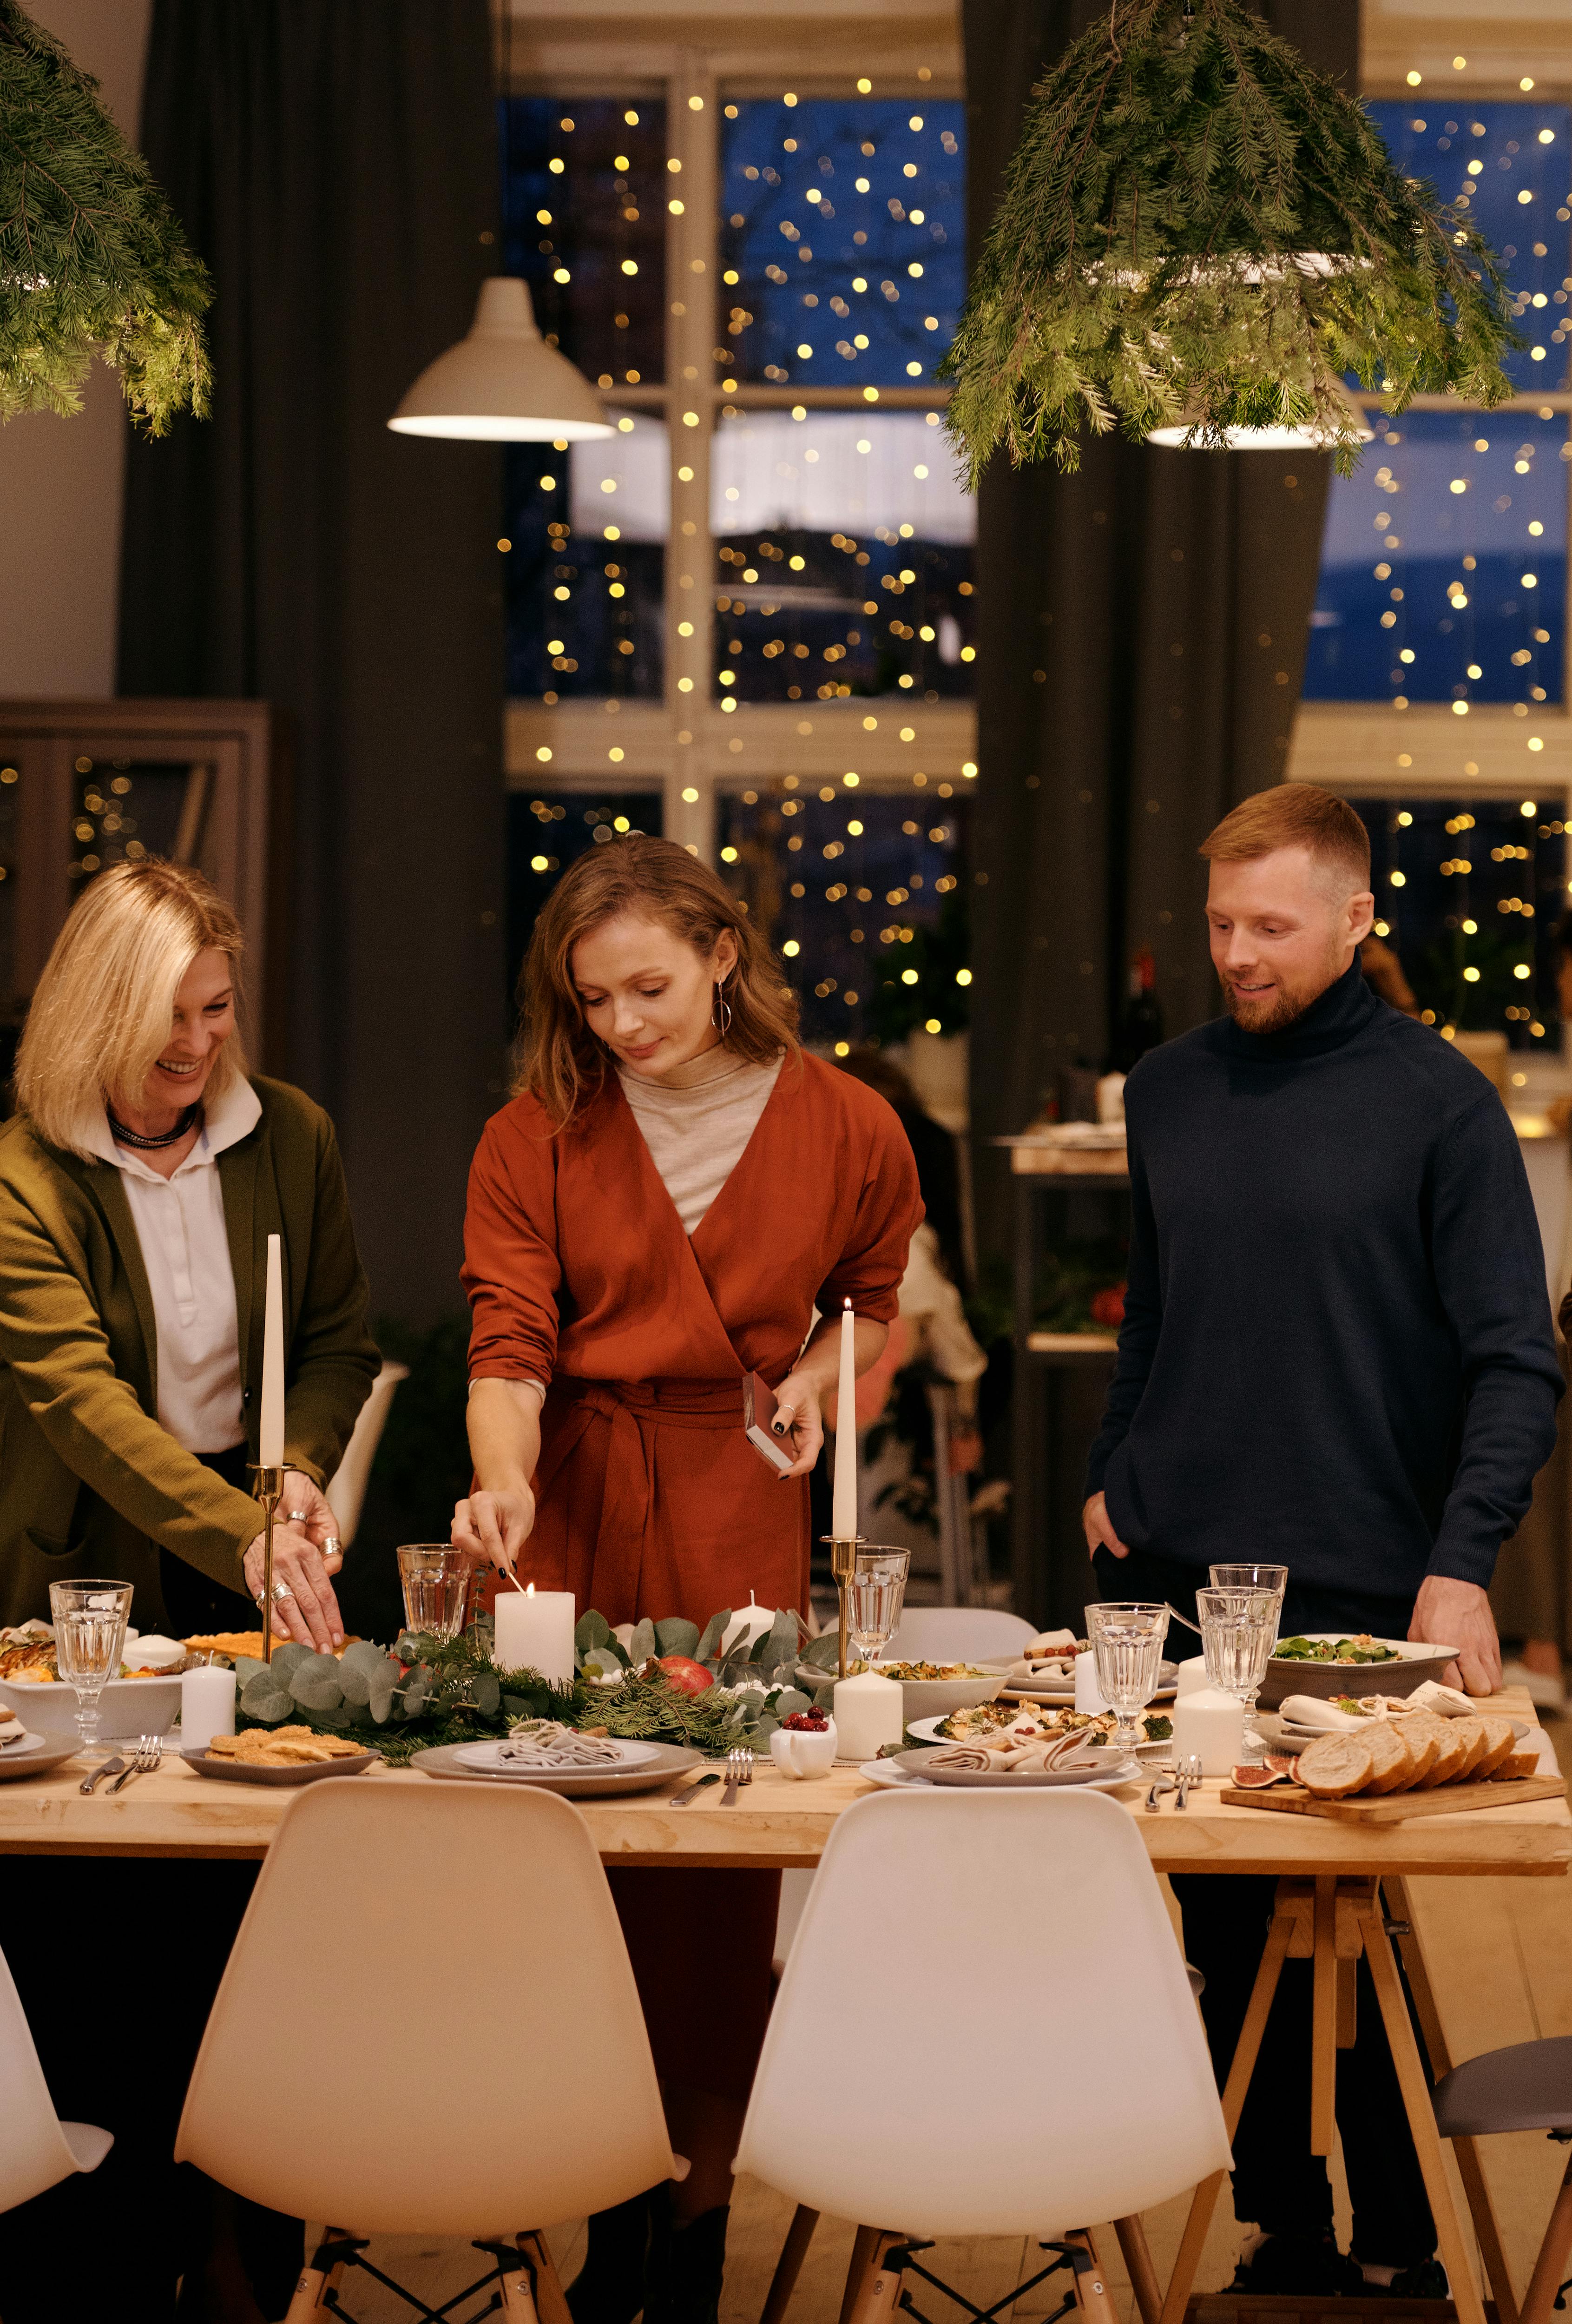 A family preparing to bond over a meal and drinks | Source: Pexels